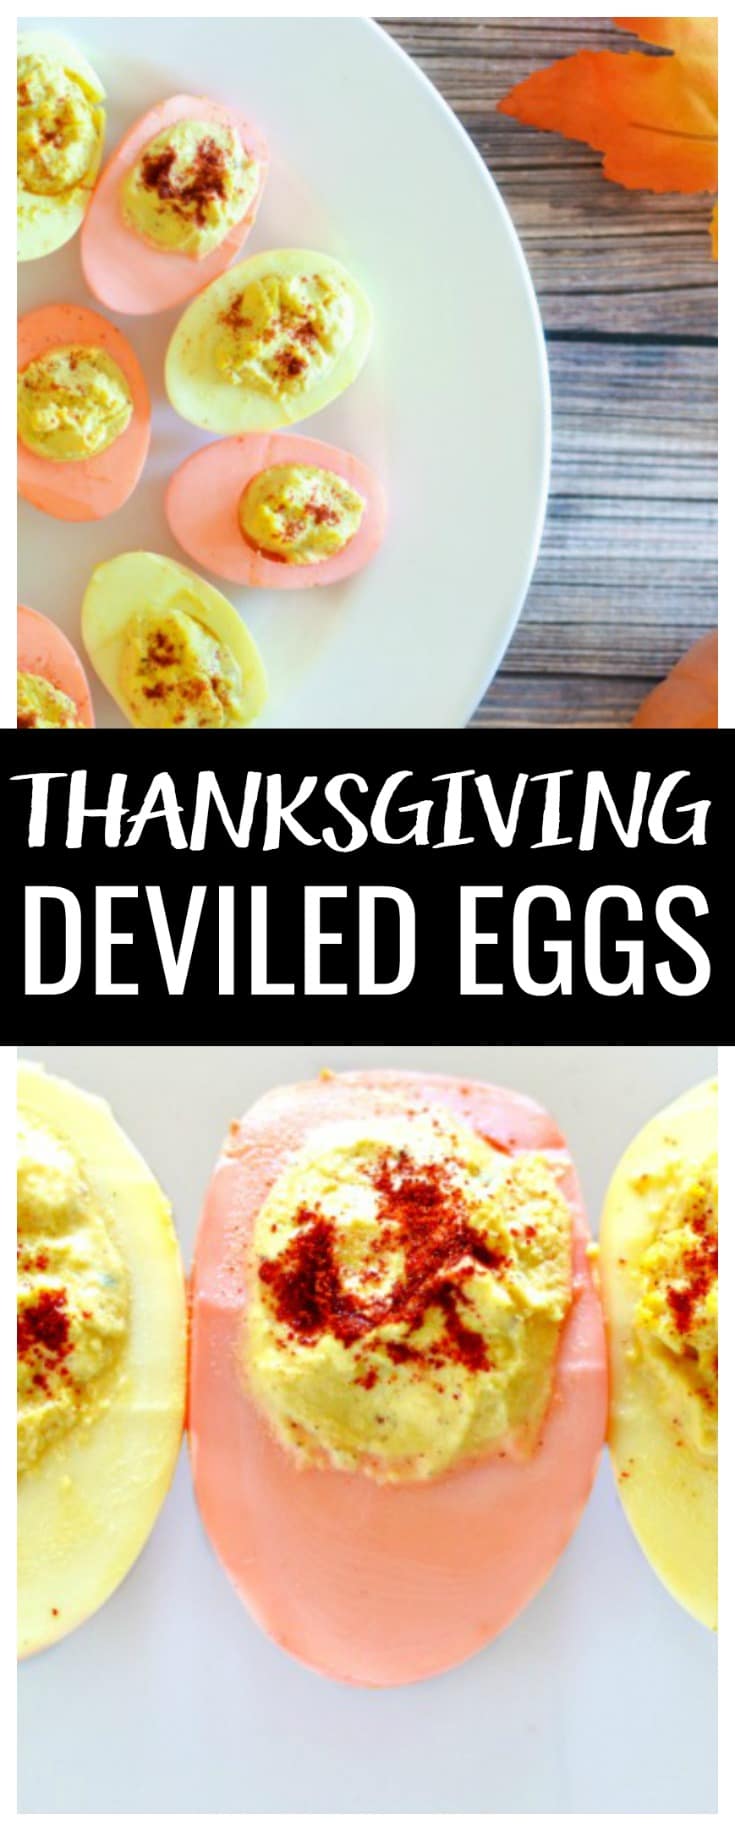 Colorful Deviled Eggs Recipe - A Bold Thanksiving Side Dish